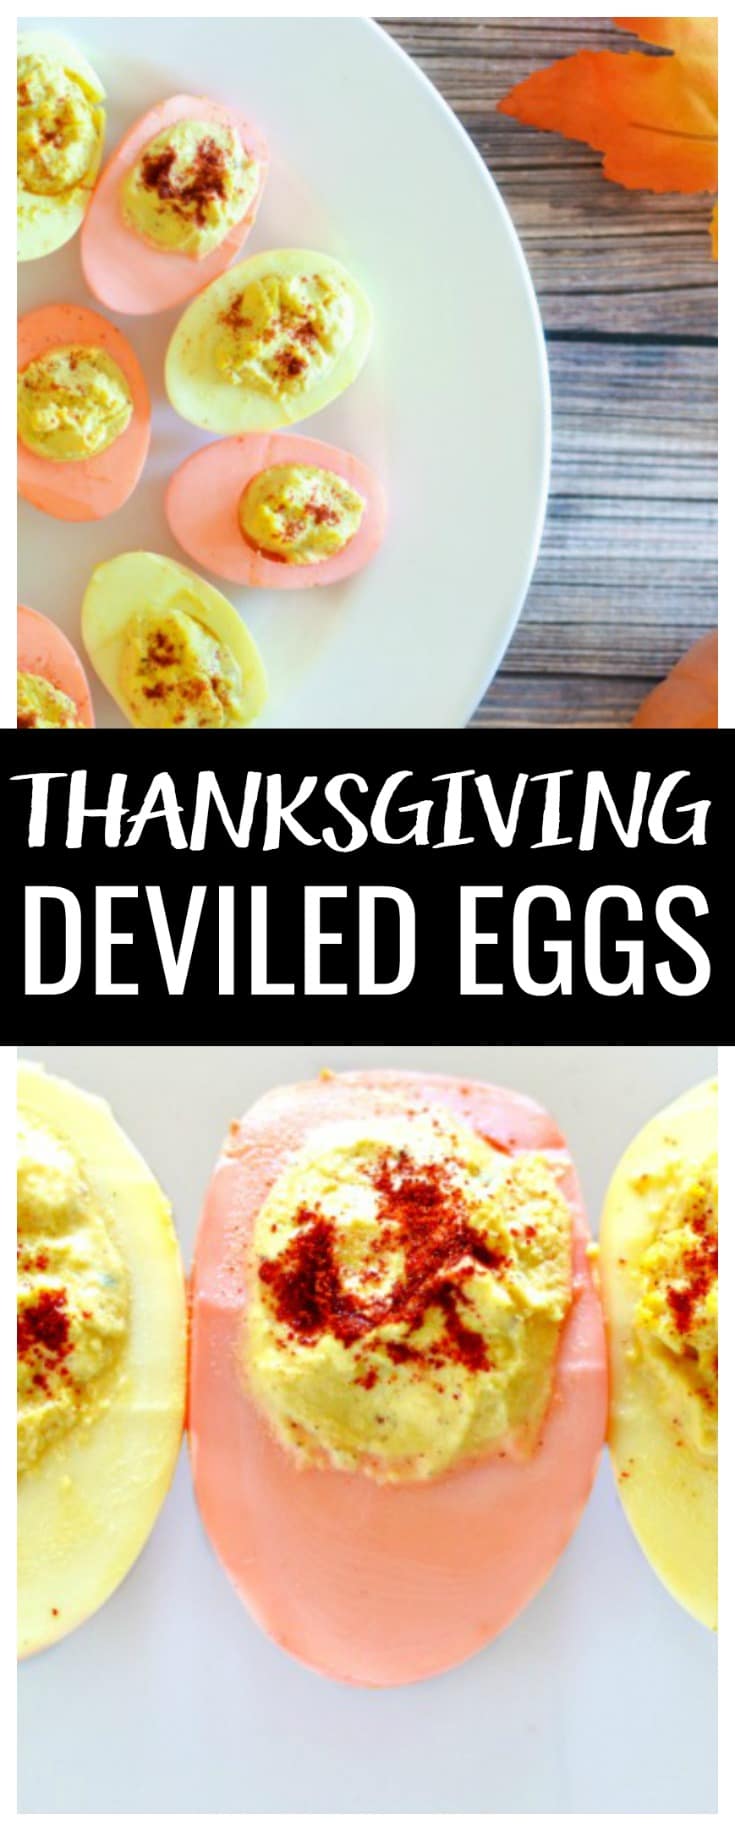 Colorful Deviled Eggs Recipe - A Bold Thanksiving Side Dish